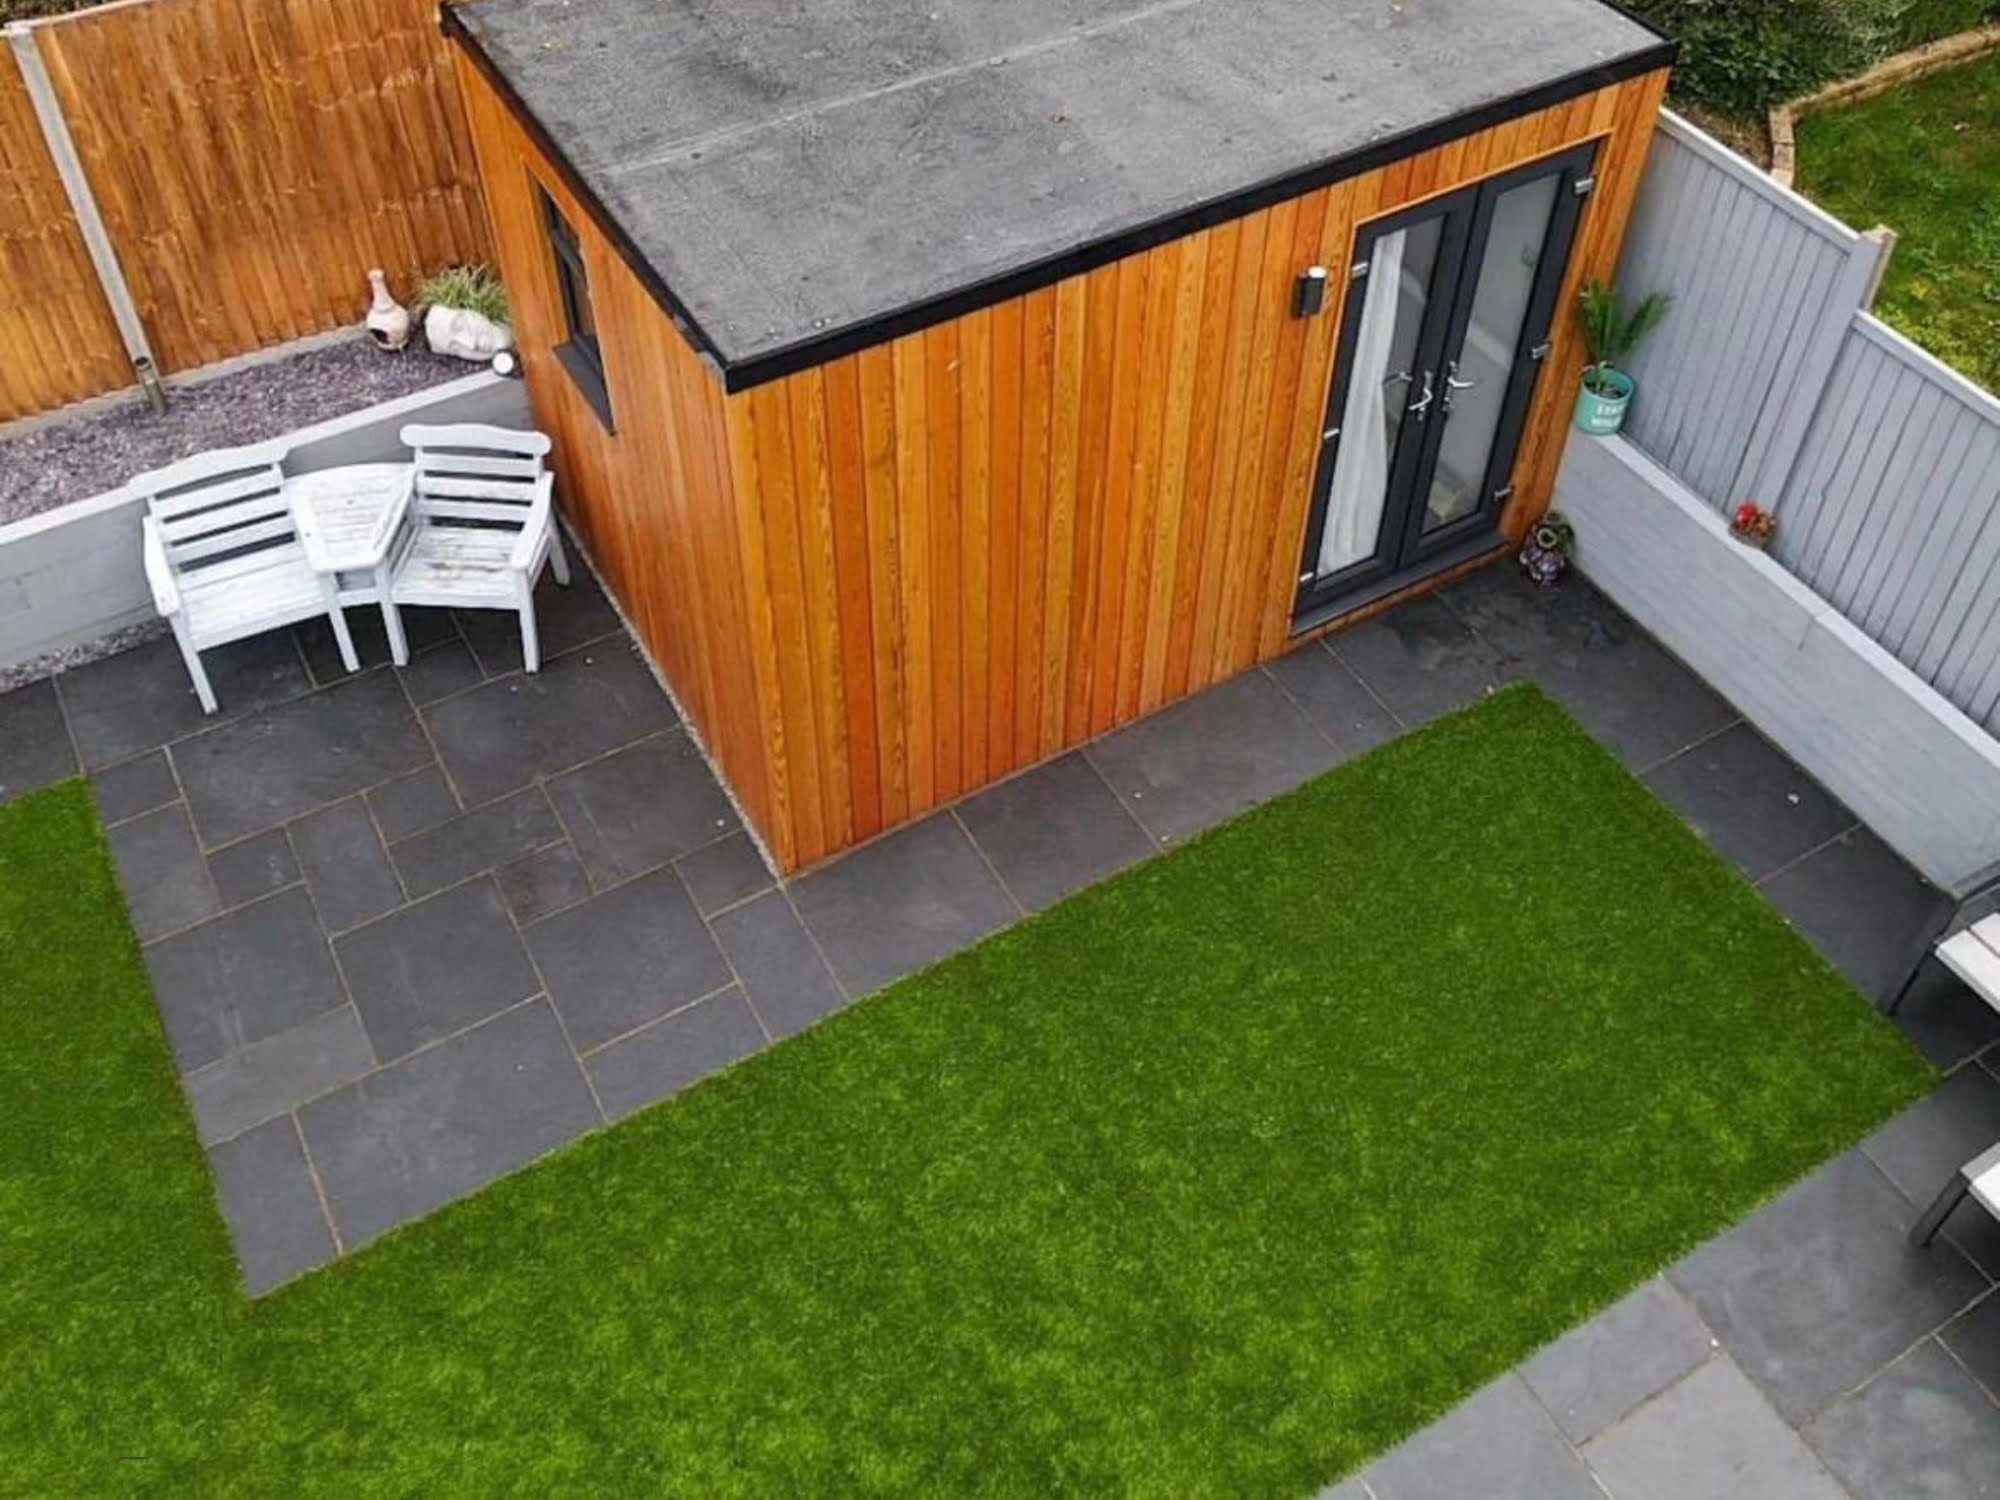 An aerial view of a garden showing newly laid turf and patio